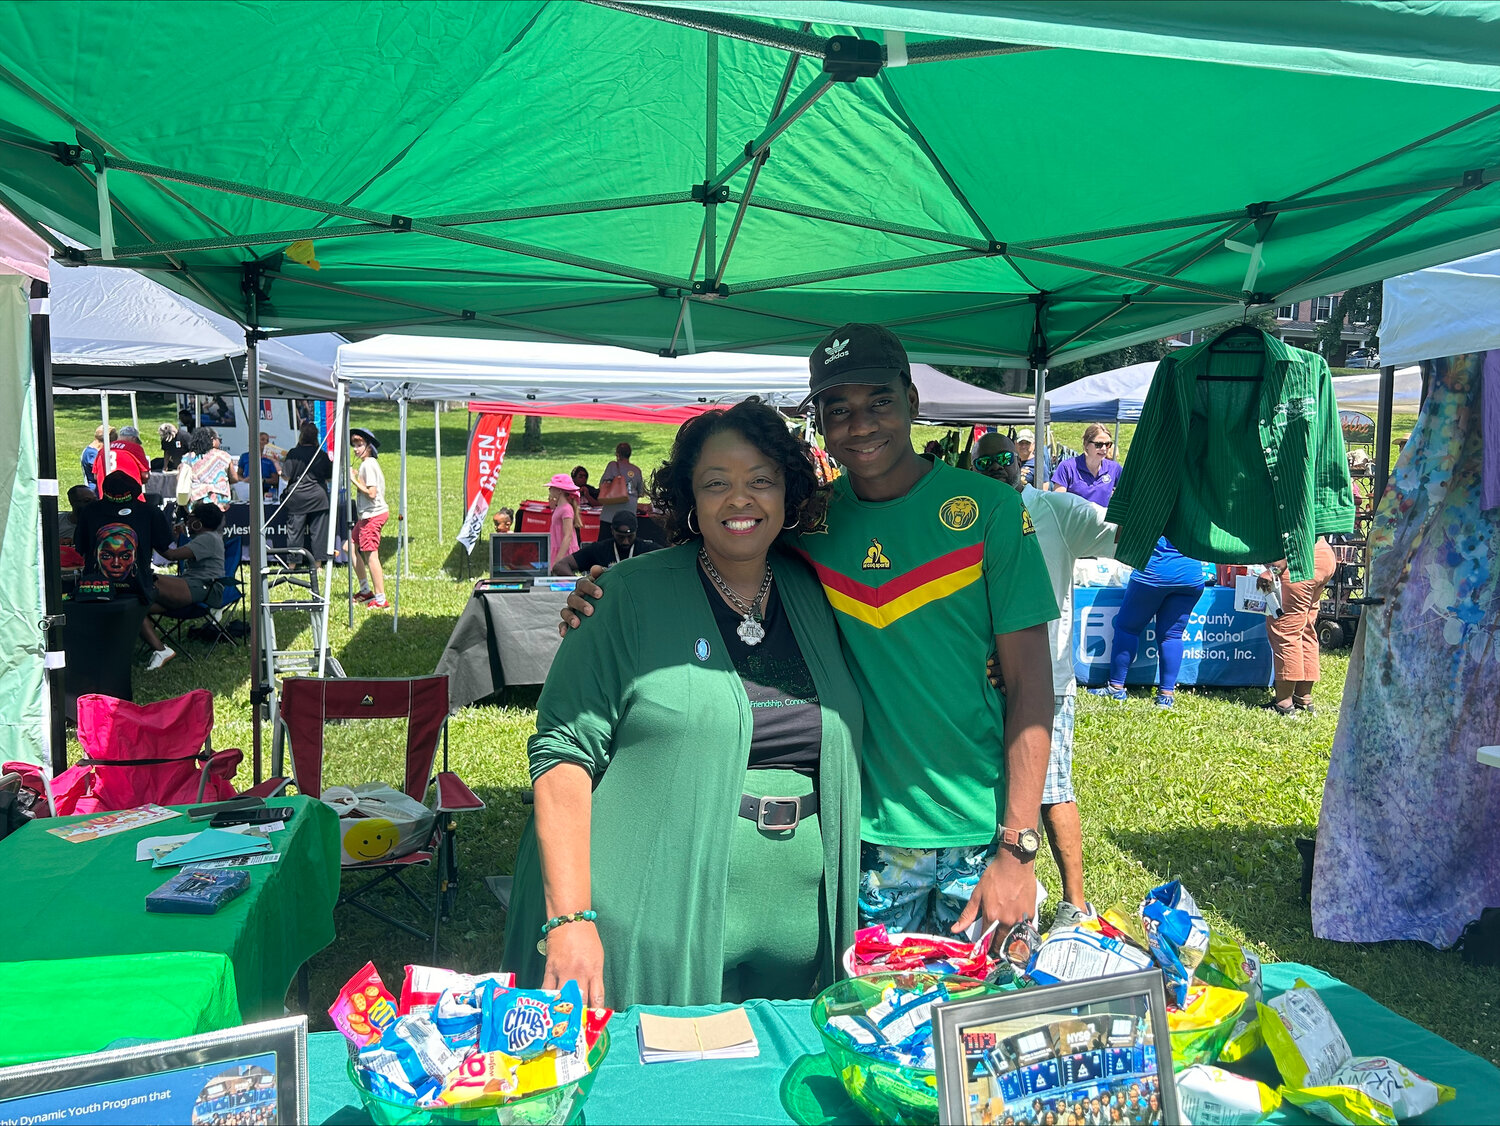 Sherita Lee, left, of the Bucks County Chapter of The Links, Incorporated, led recruiting efforts for the organization’s youth council at Saturday’s Juneteenth Celebration in Doylestown.